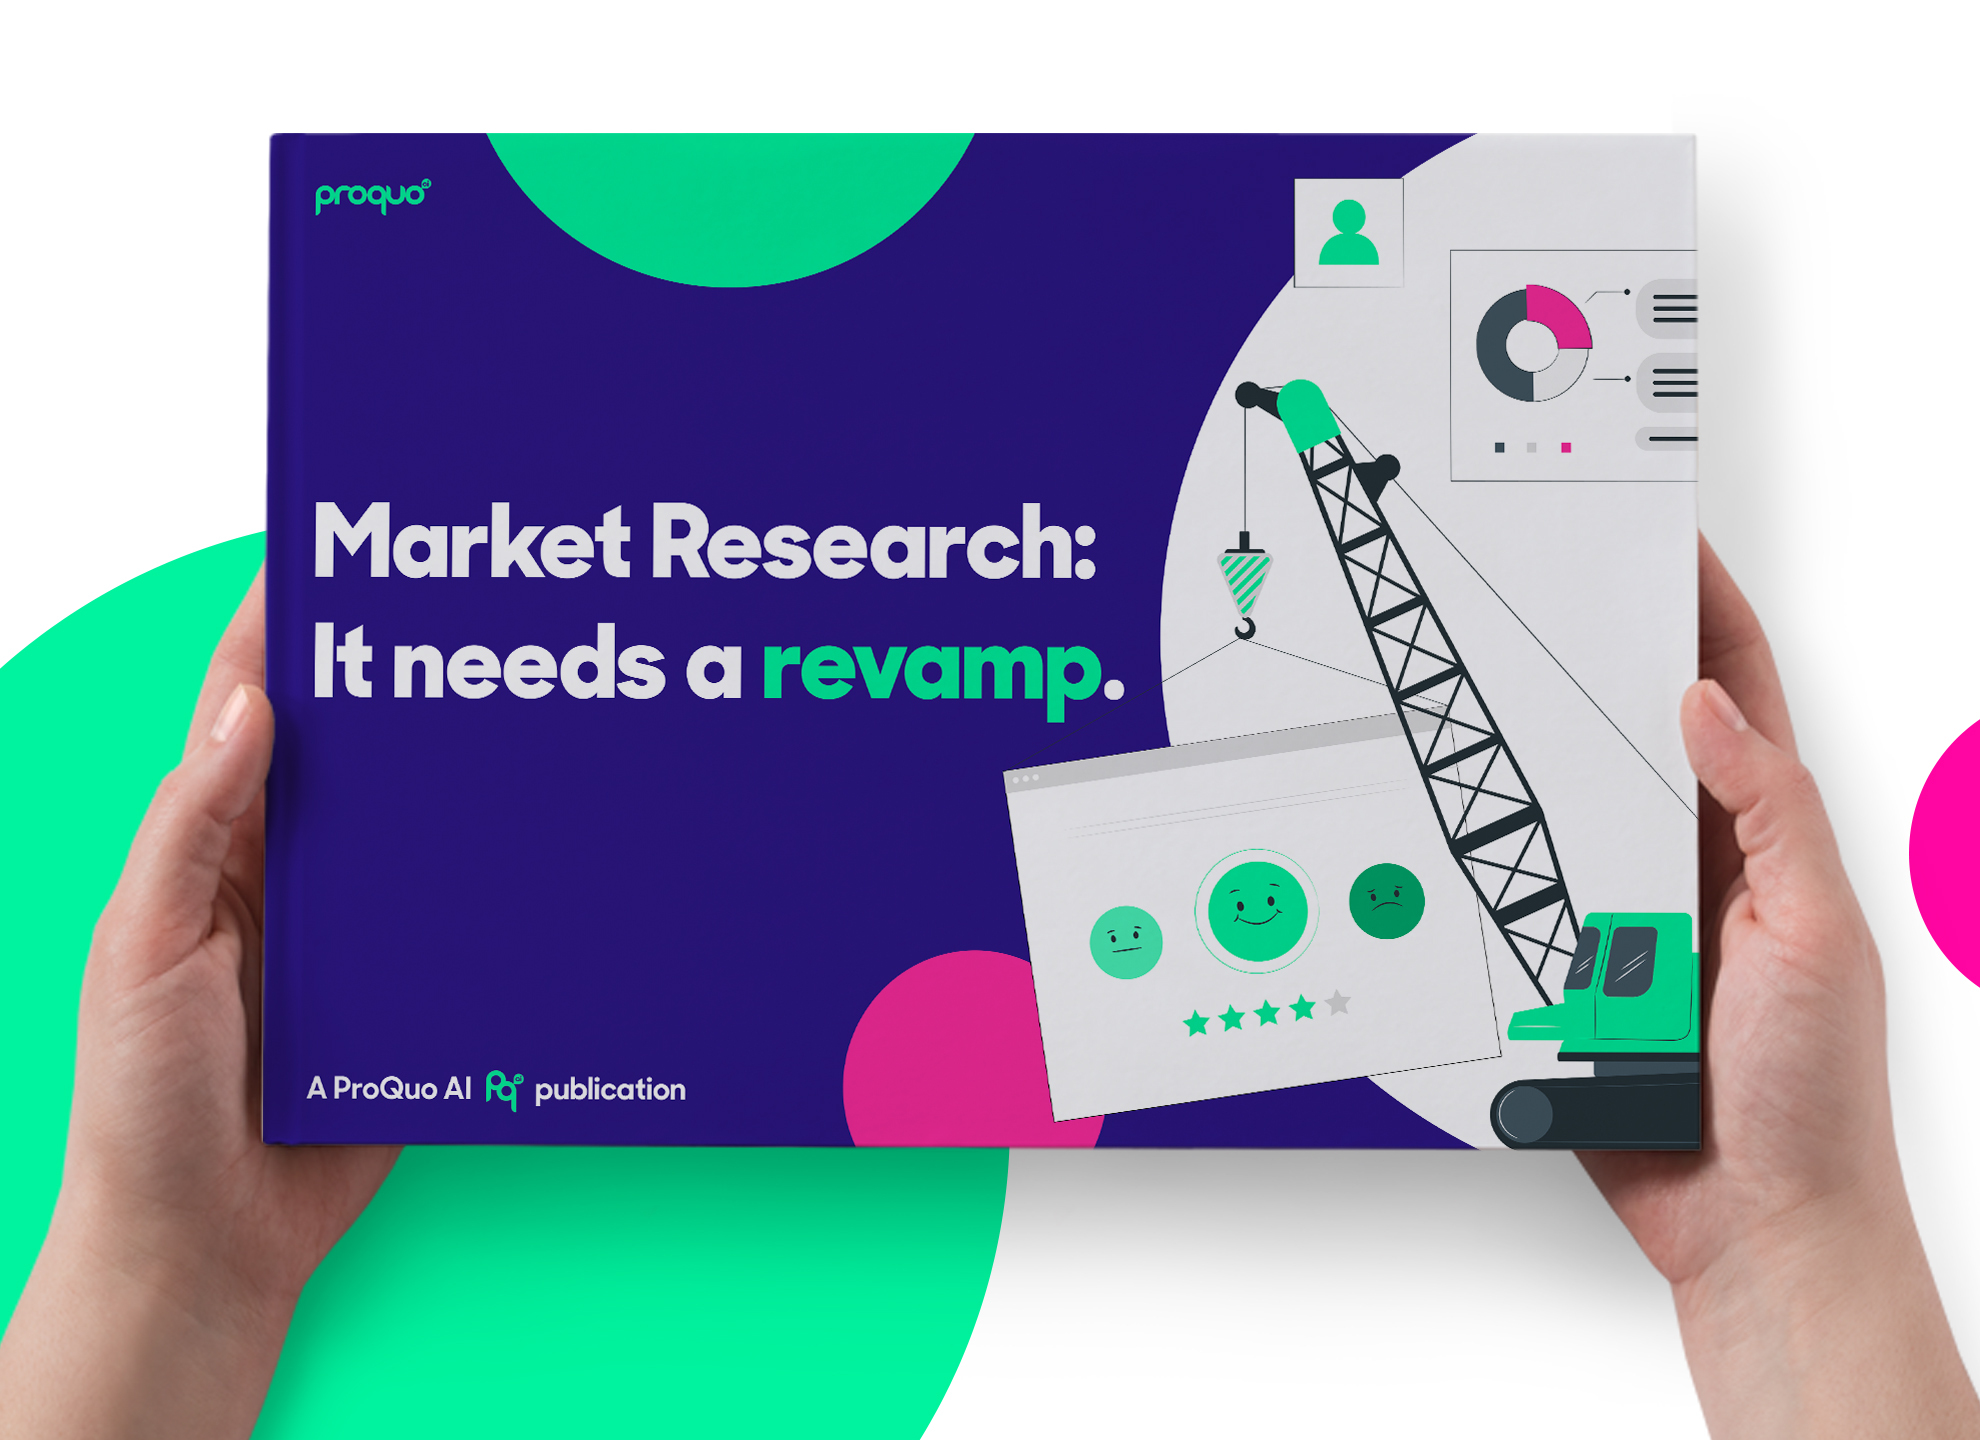 Market Research: It needs a revamp